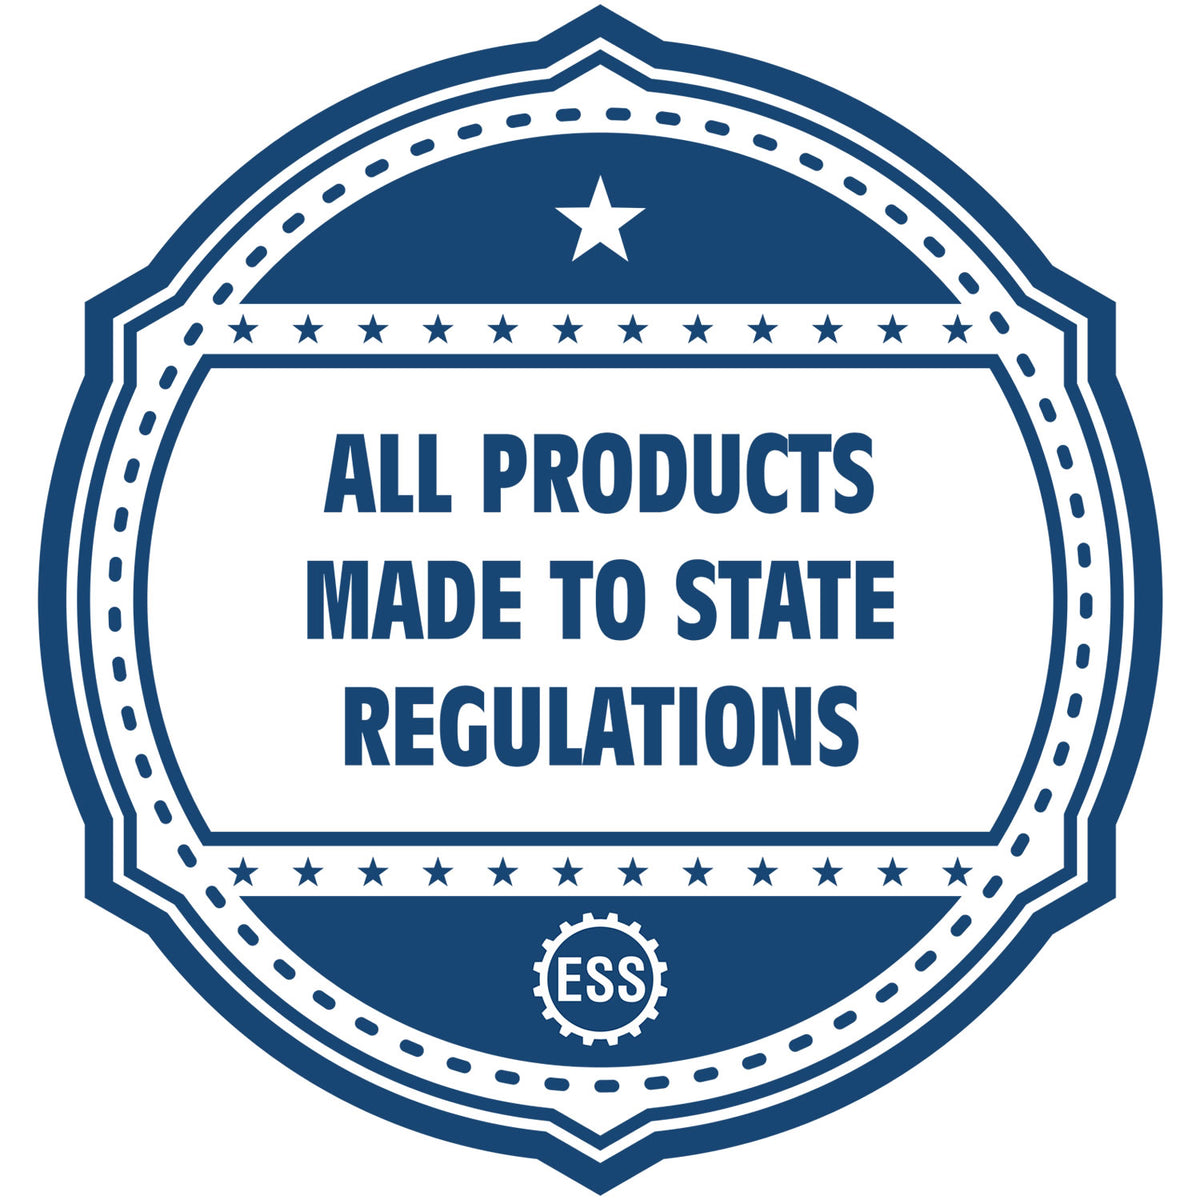 A blue icon or badge for the Vermont Professional Geologist Seal Stamp showing that this product is made in compliance with state regulations.